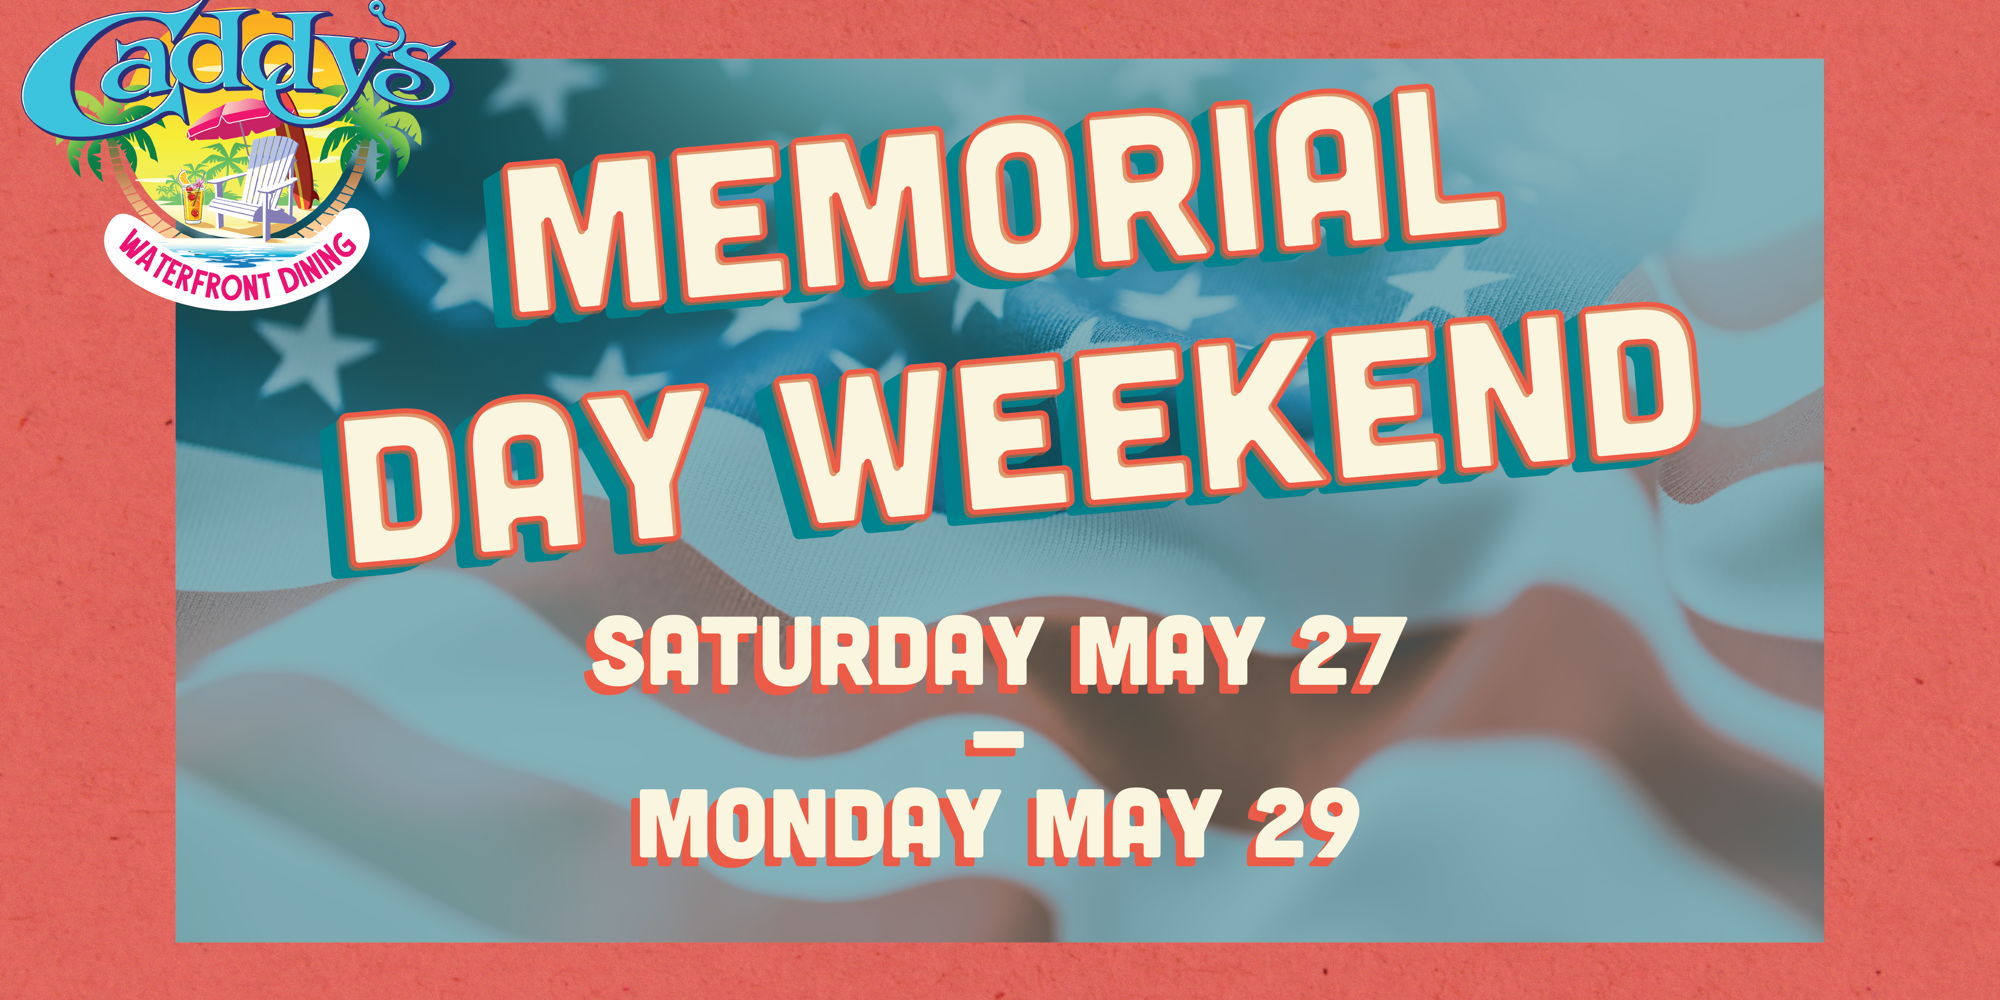 Memorial Day Weekend! promotional image